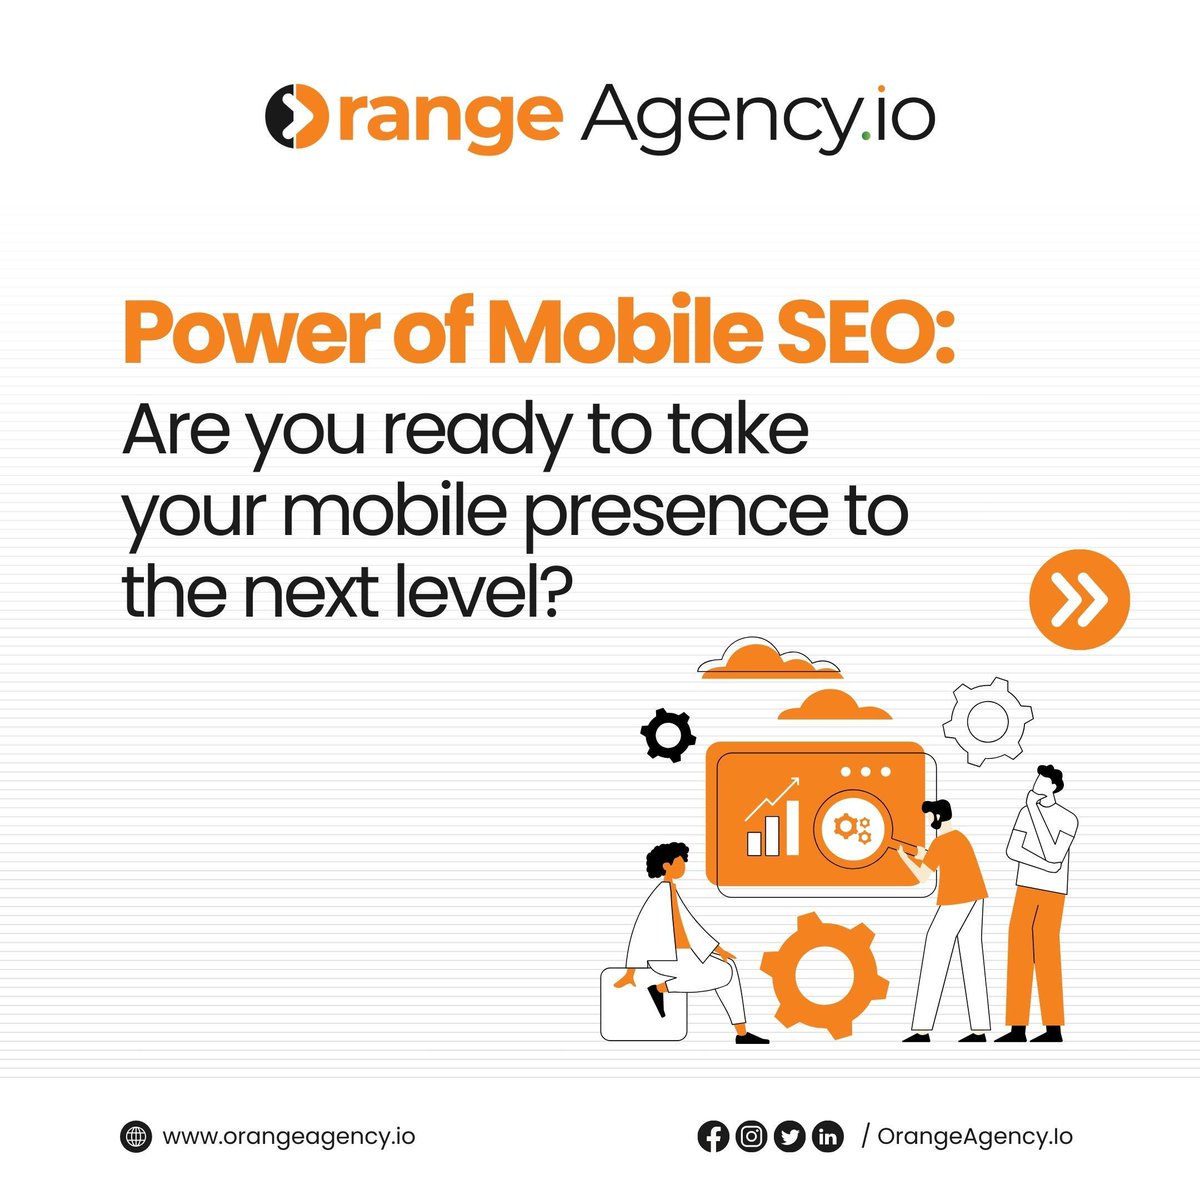 Power of Mobile SEO: Are you ready to take your mobile presence to the next level?

Let's take your digital presence to new heights. tinyurl.com/43nmasw5

#OrangeAgency #MobileSEO #DigitalMarketing #SEOBenefits #UserExperience #Niger #ElonMusk #Titanic #TheEqualizer3